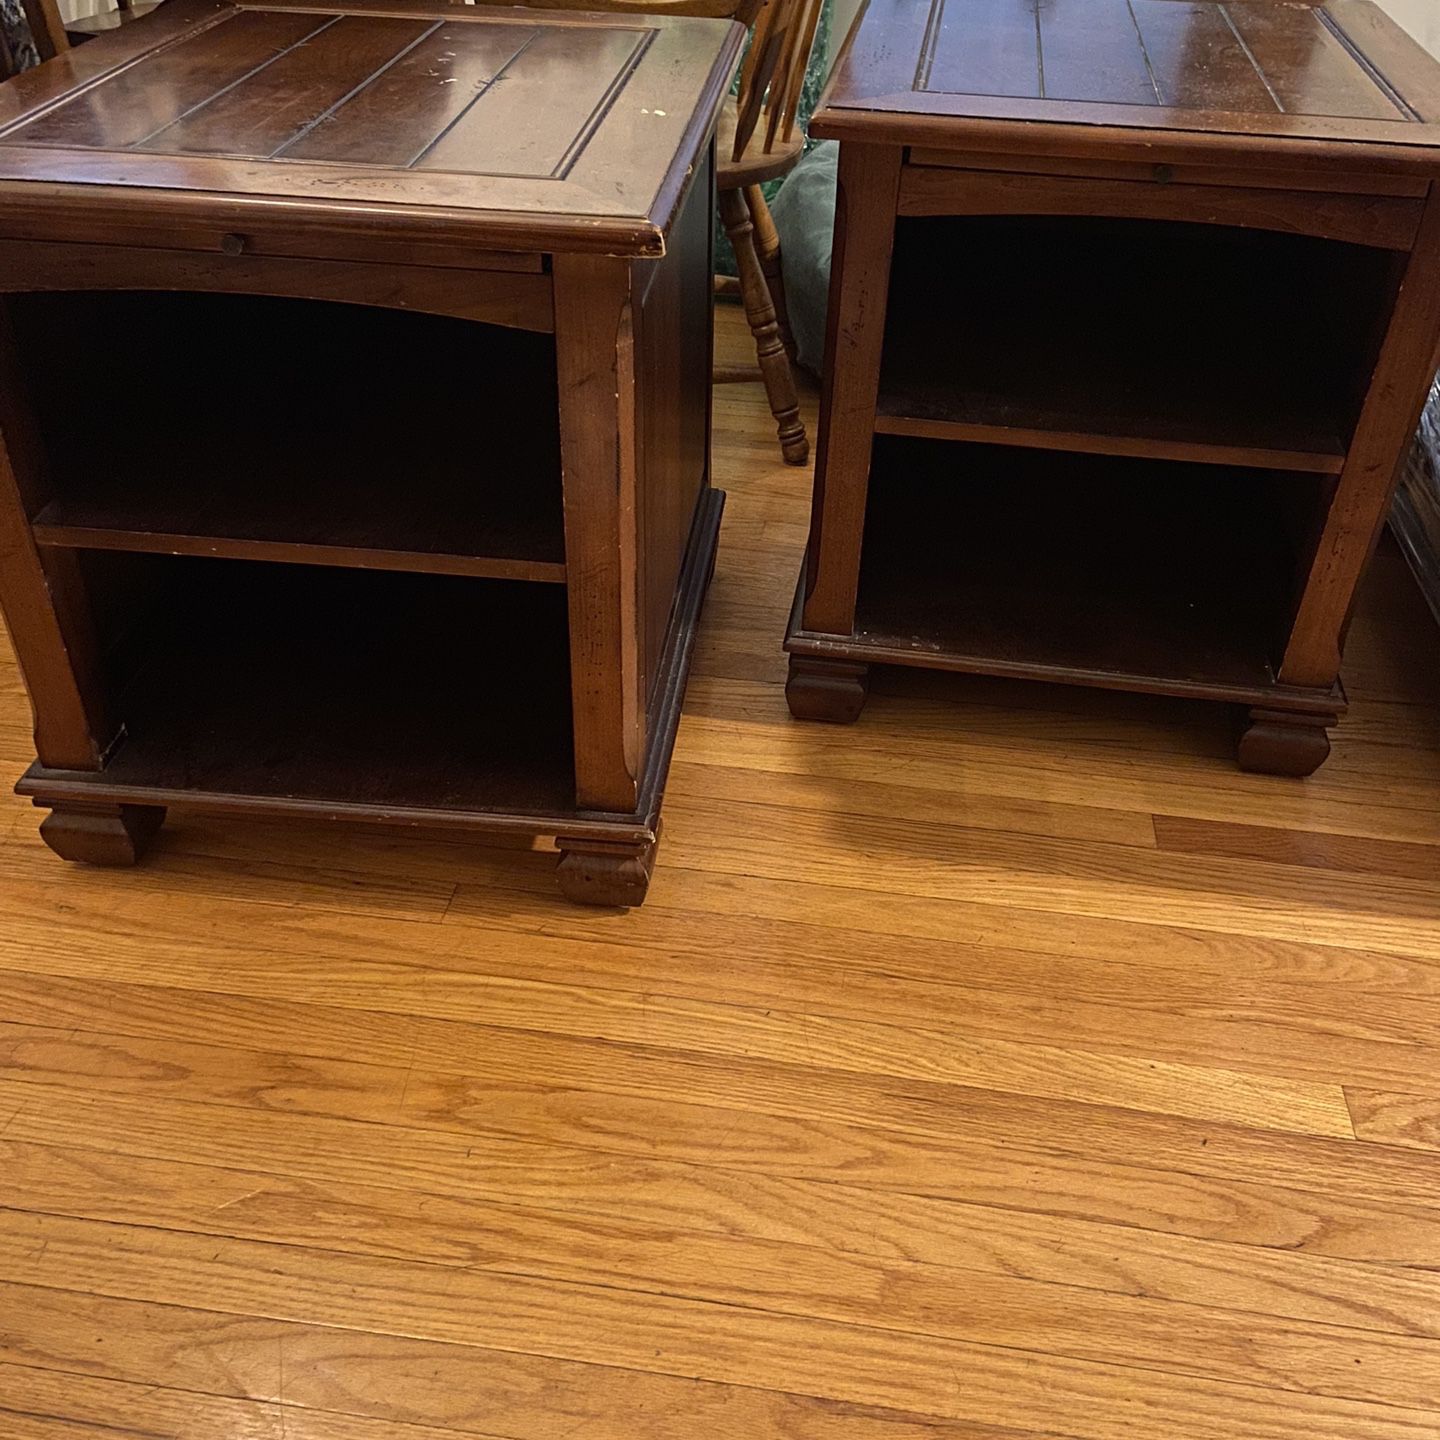 Wood End Tables With Storage Shelves